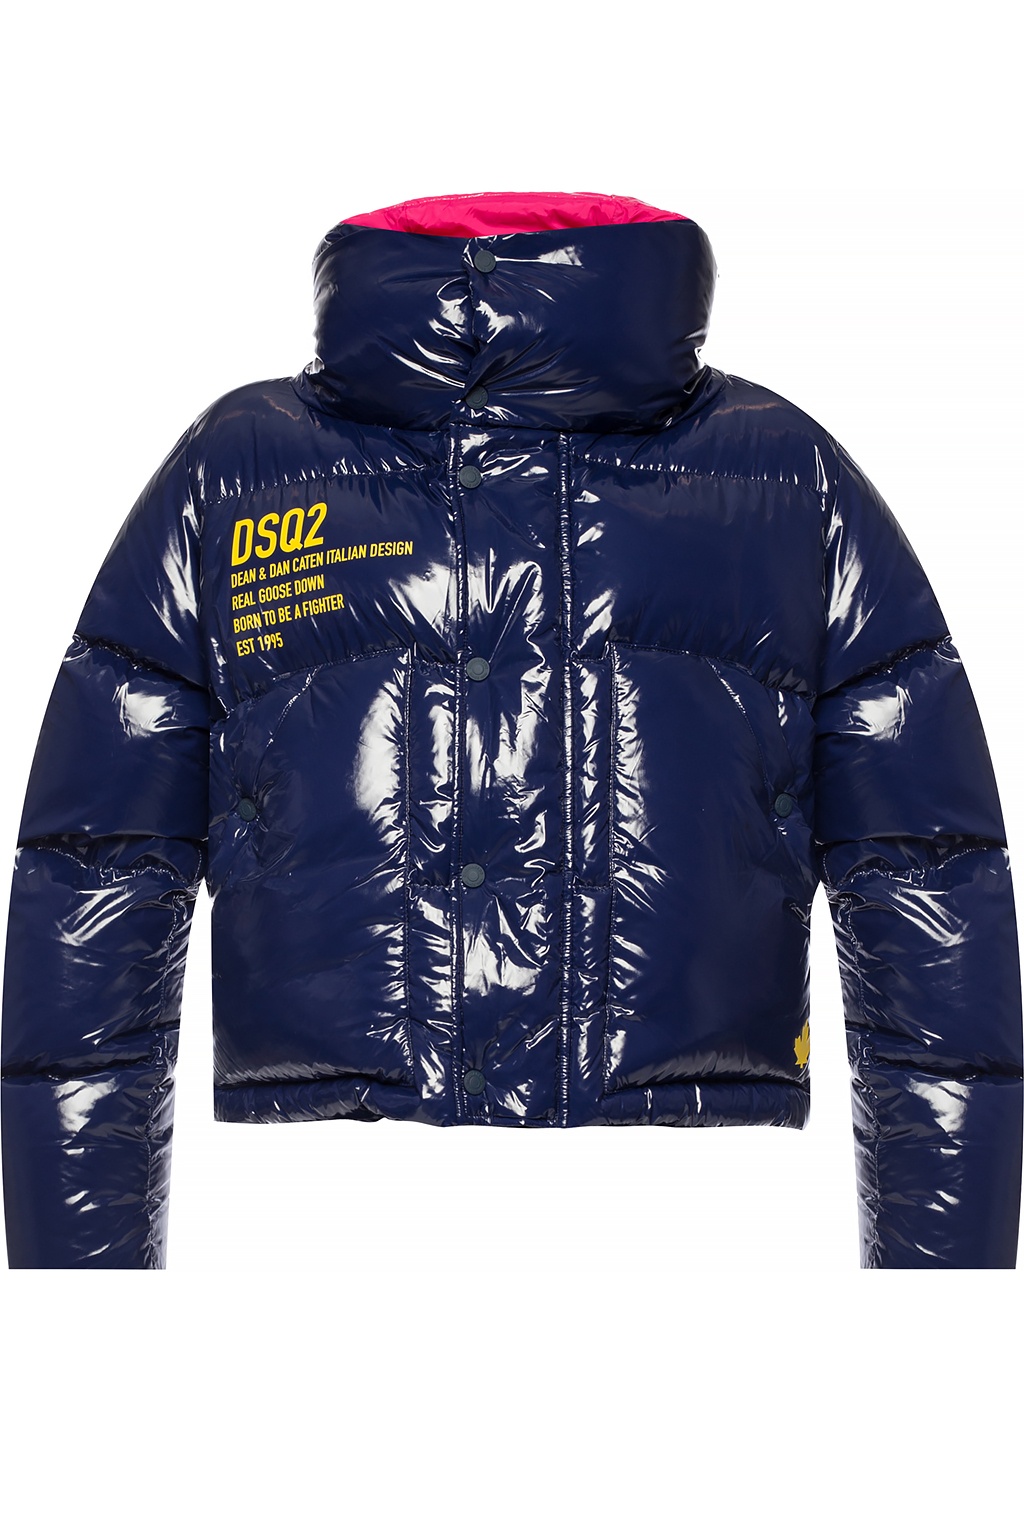 dsquared2 fighters jacket